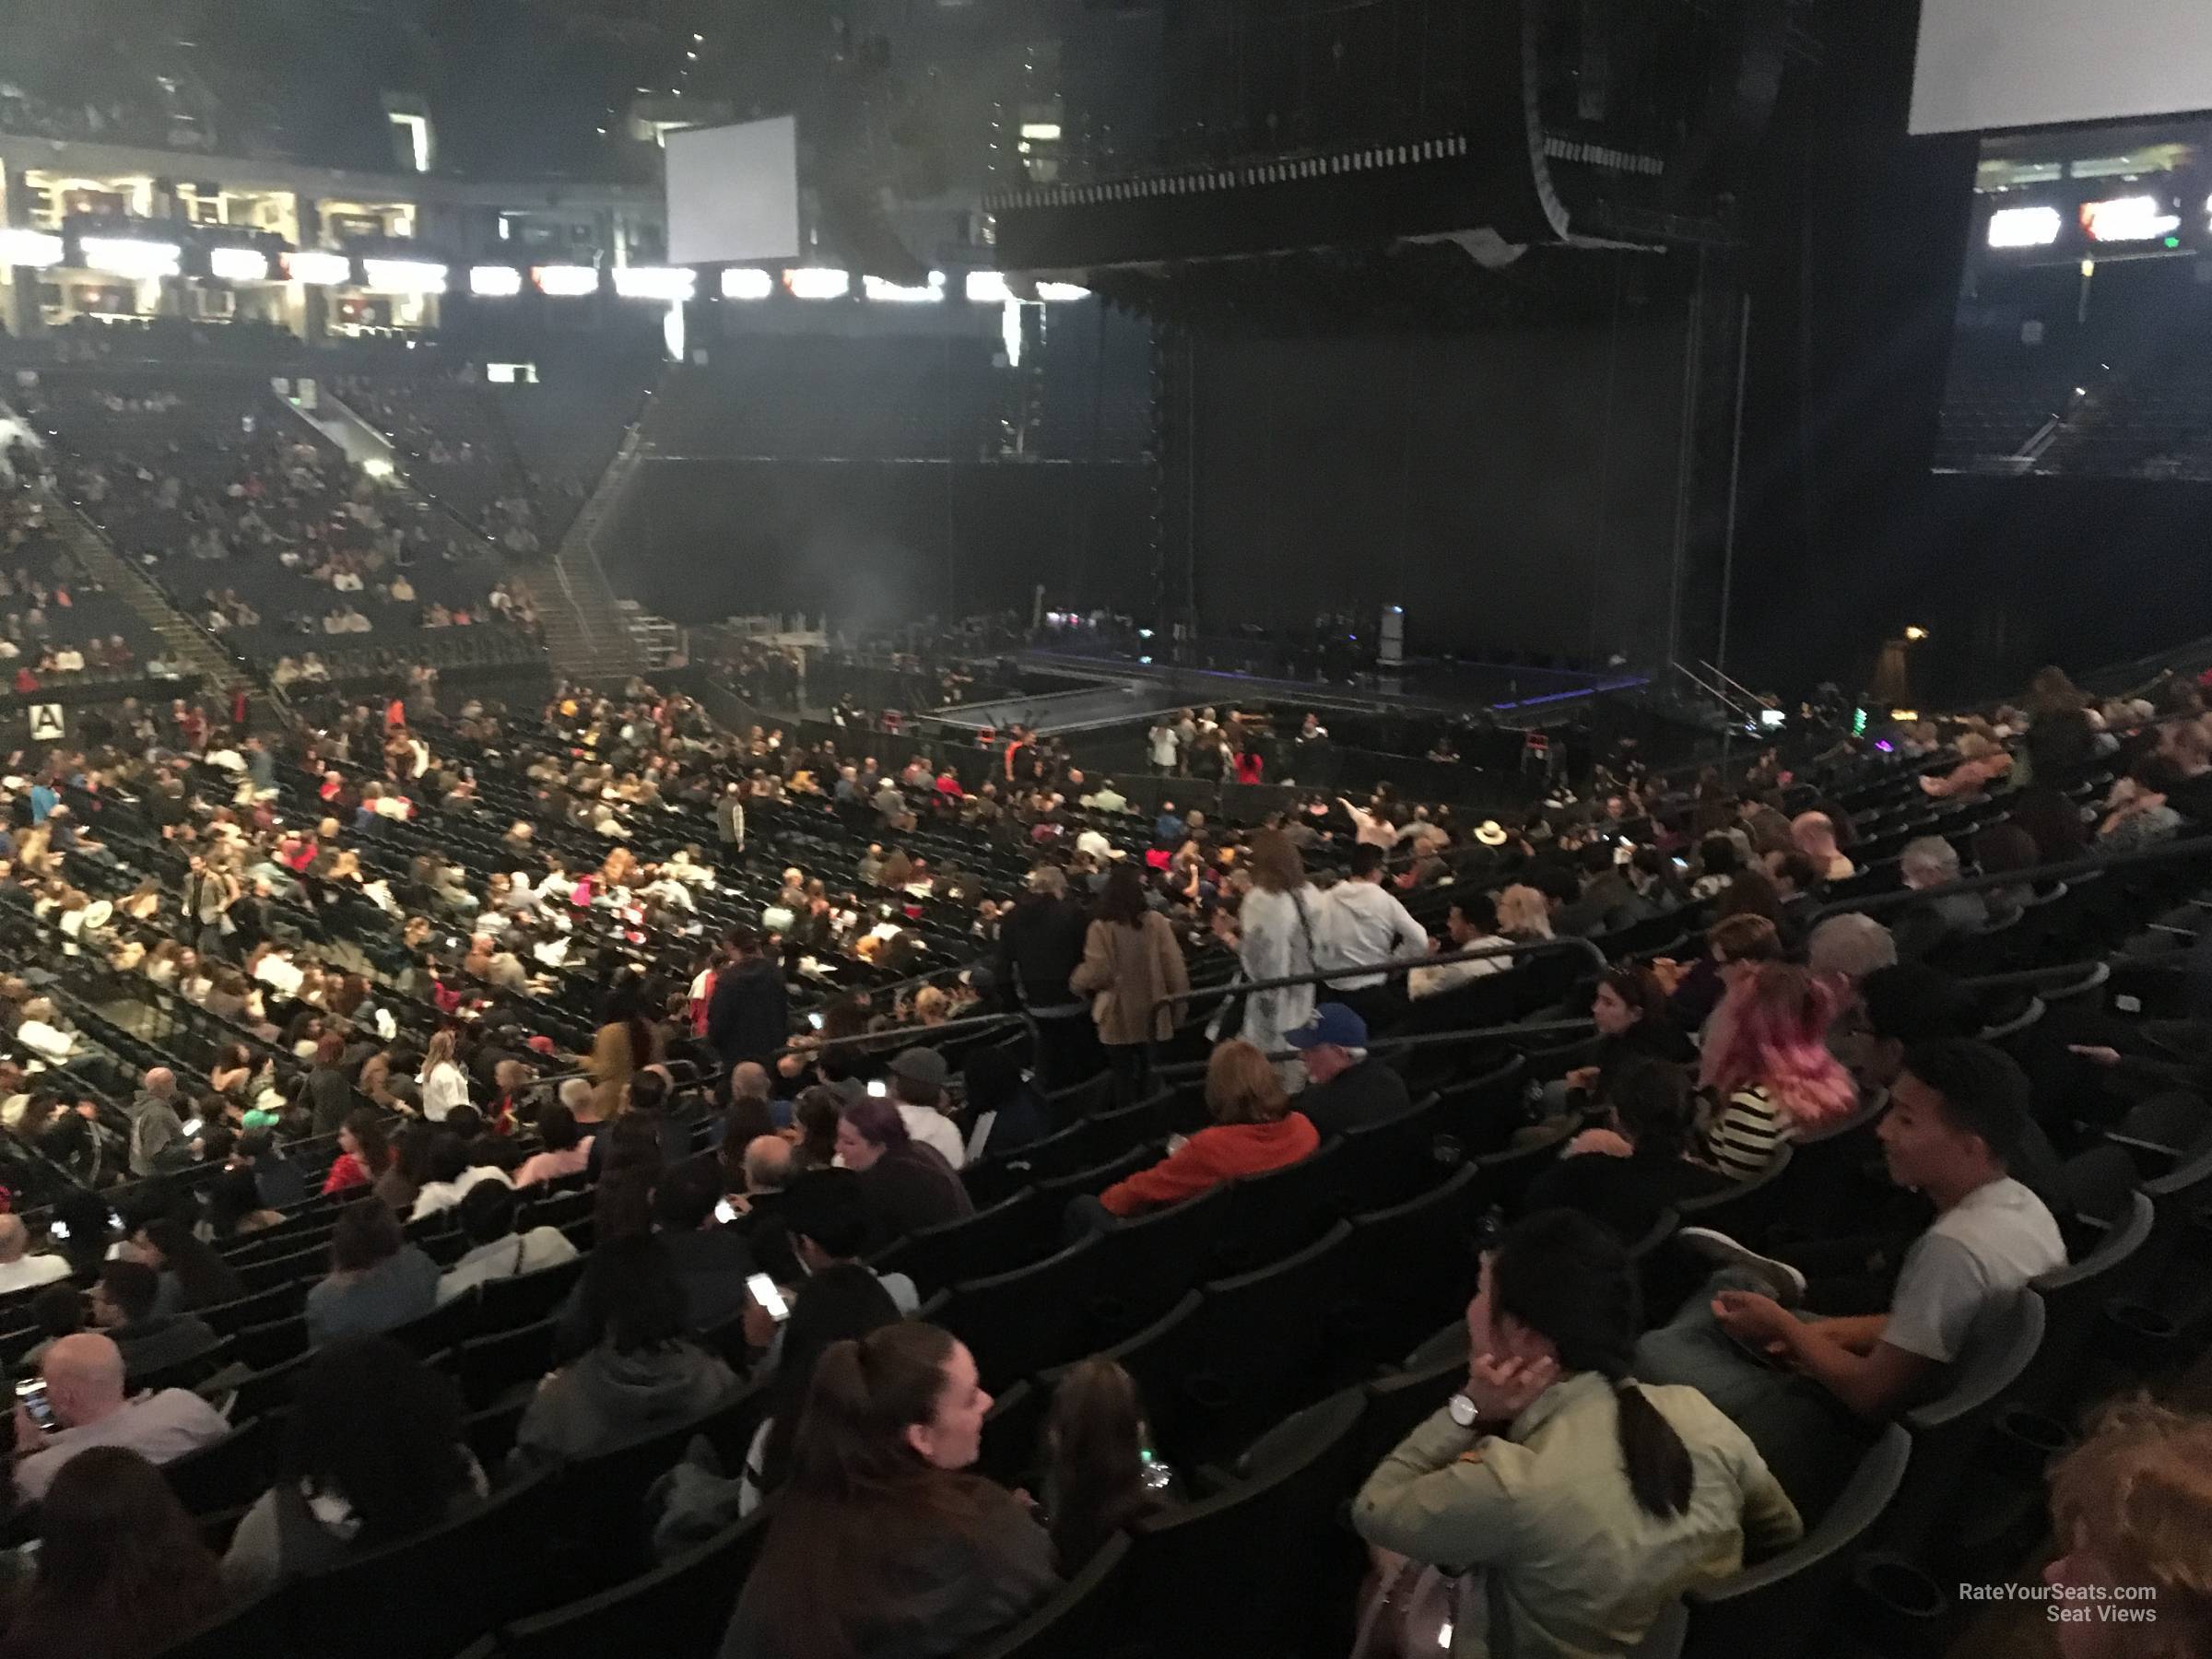 section 101, row 16 seat view  - oakland arena